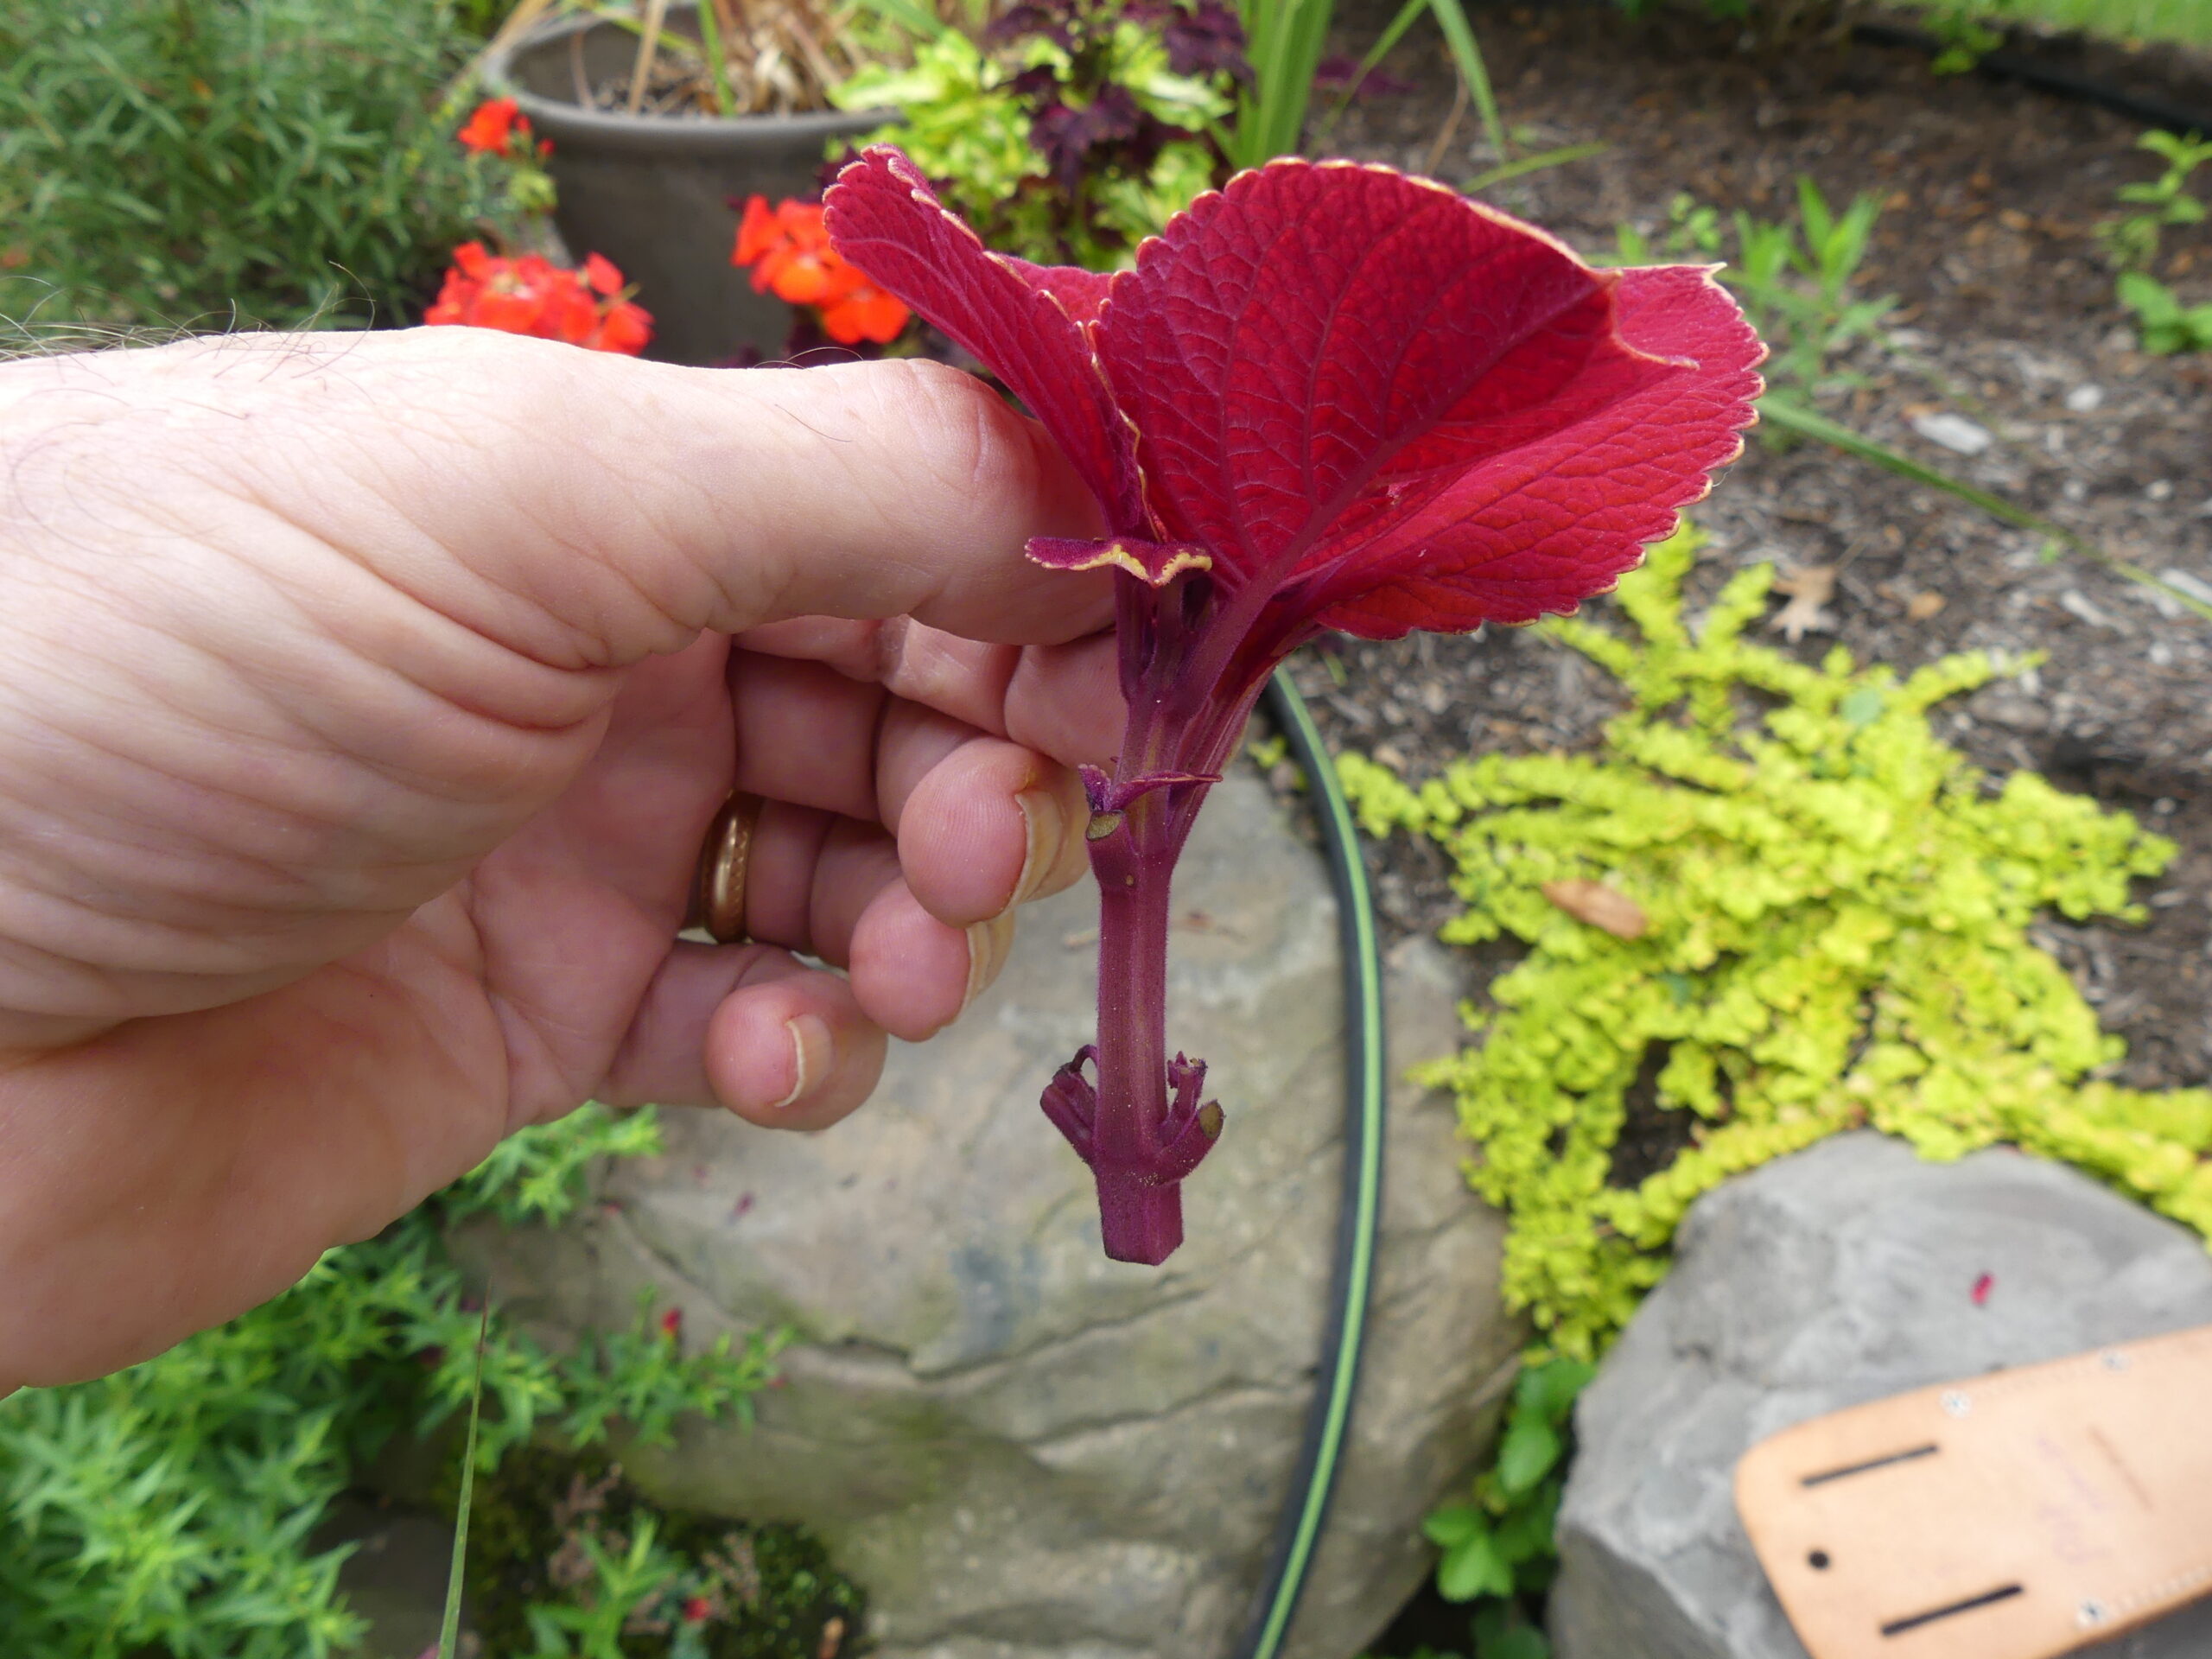 On a cloudy day take a tip cutting of your coleus that’s about 2.5 inches long.  Remove the bottom leaves with a pruner and dust the bottom inch of the stem with a #1 rooting hormone.  Place the cutting in wet sand (not beach sand) or a propagation mix.  If kept in a bright spot indoors and occasionally misted it will root in 7-10 days and can be potted up once well rooted.
ANDREW MESSINGER